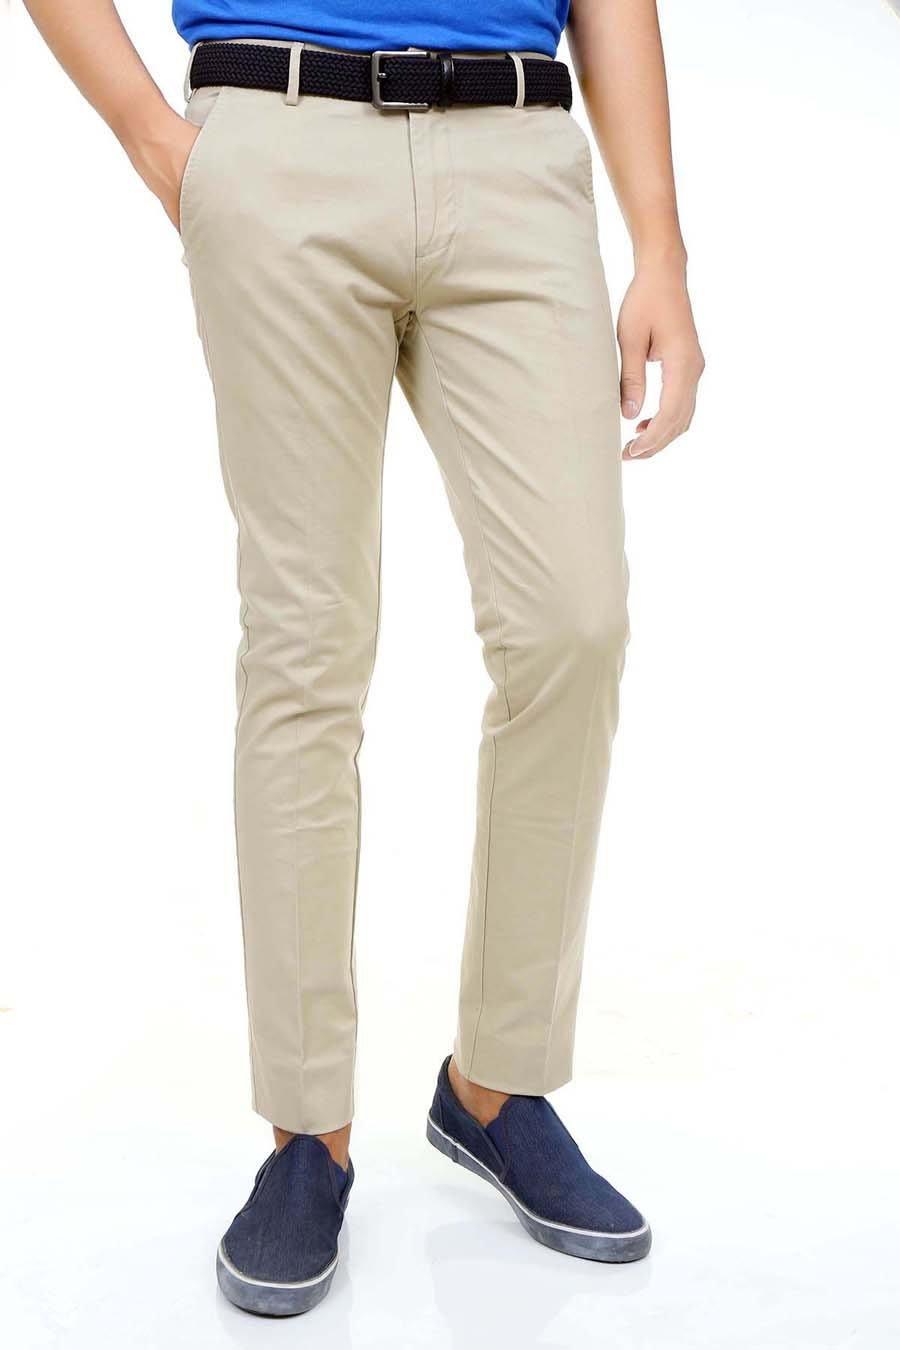 Casual Pant Cross Pocket Beige - Slim Fit at Charcoal Clothing